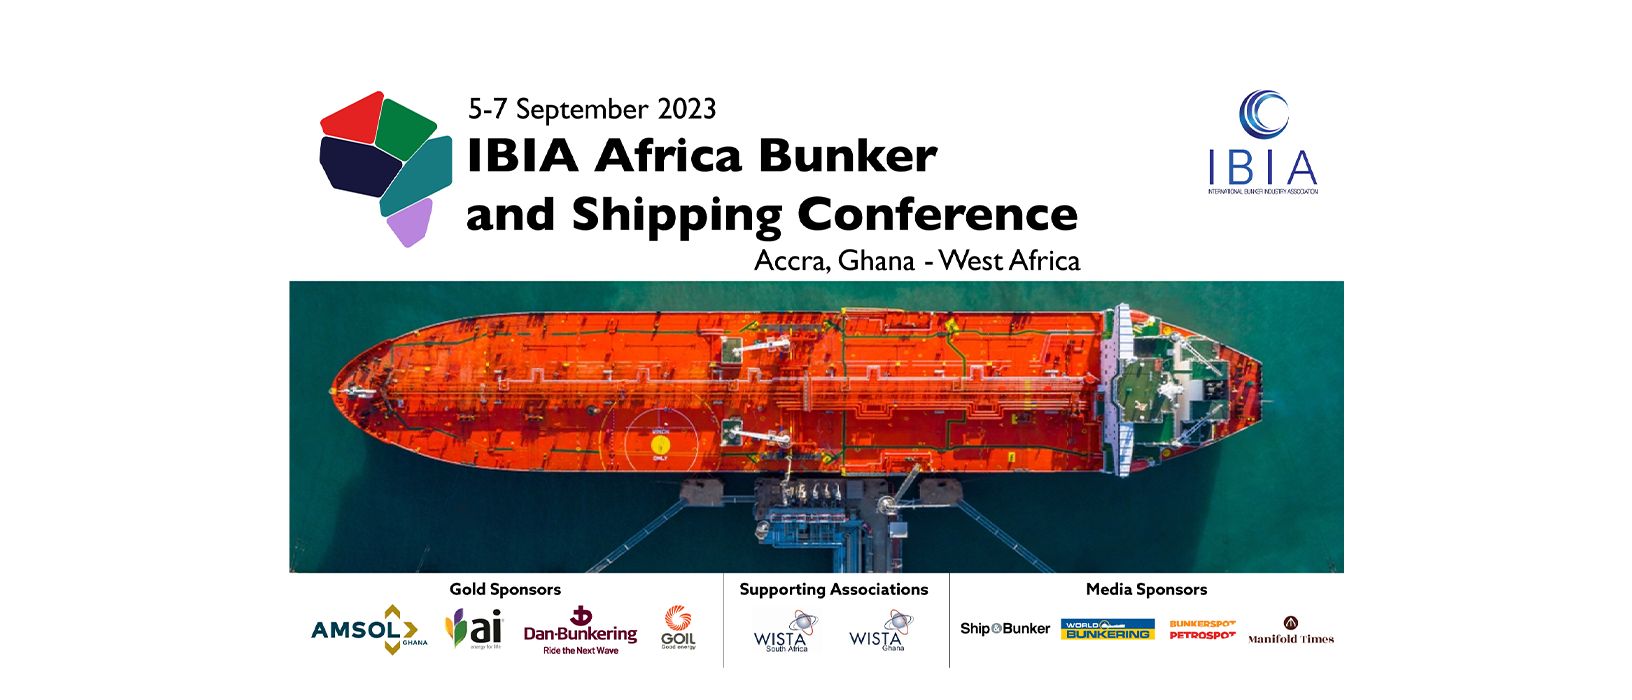 IBIA pleased to announce Honourable Matthew Opoku Prempeh, Minister of Energy of Ghana, and Dr. Harry T. Conway, IMO MEPC Chair, as speakers at IBIA Africa Bunker and Shipping Conference in Accra